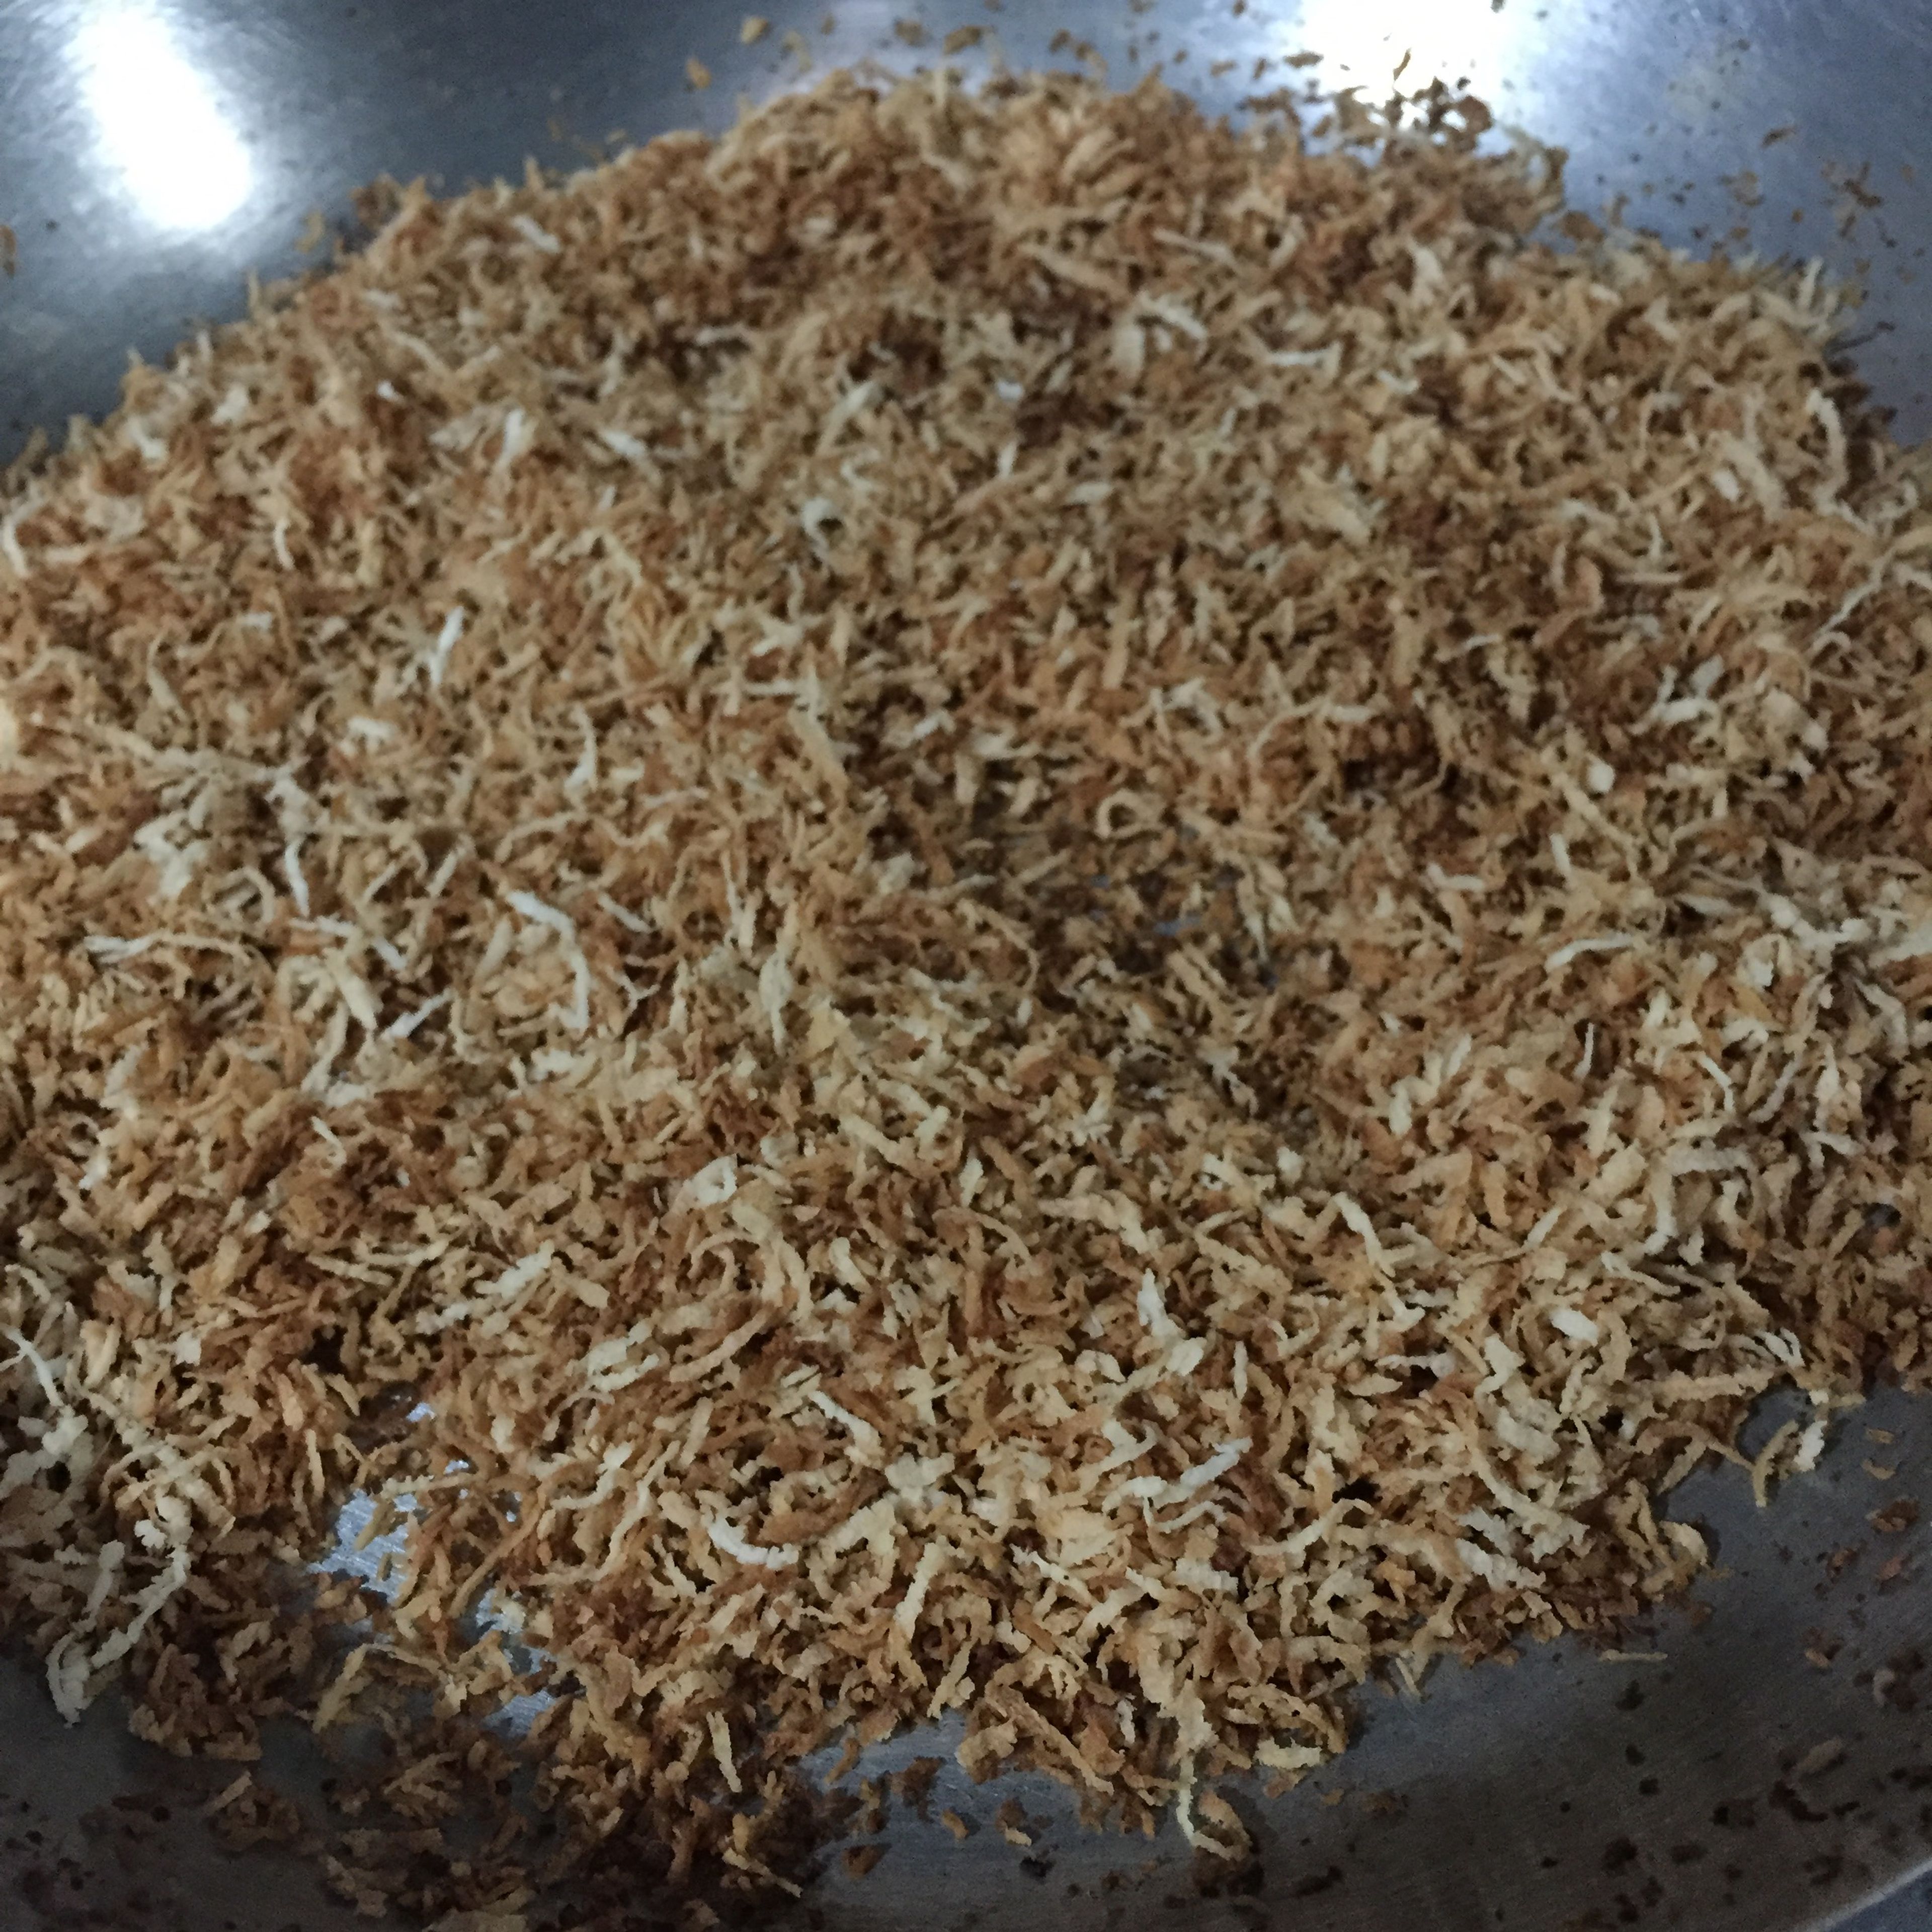 Toasts 1 cup of grated coconut until golden brown and fragrant. Set aside.